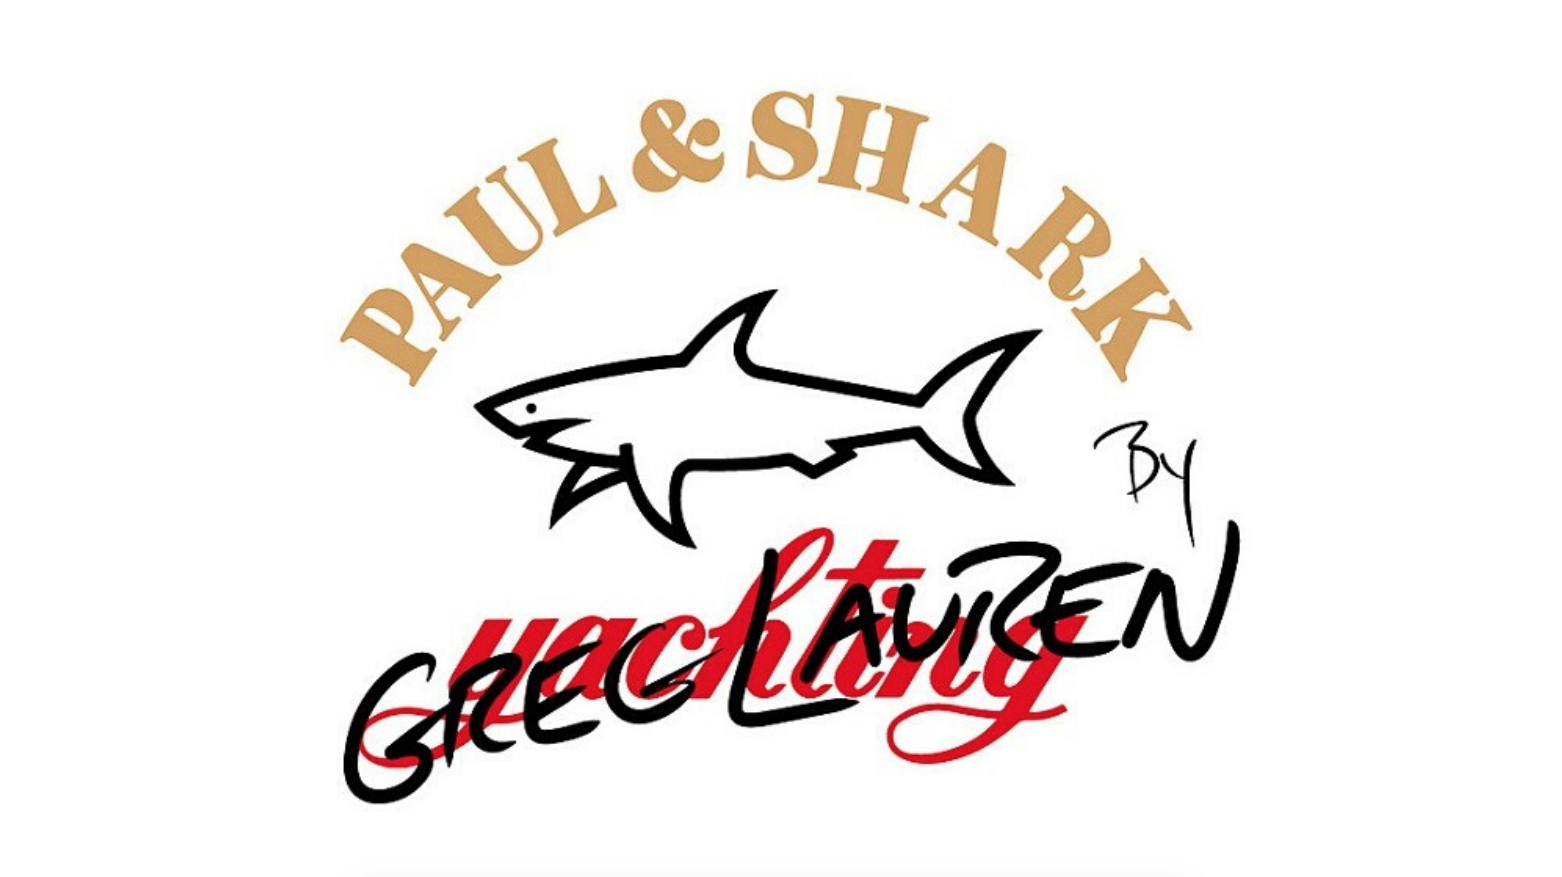 The Paul & Shark SS20 collection designed with the designer Greg Lauren ...